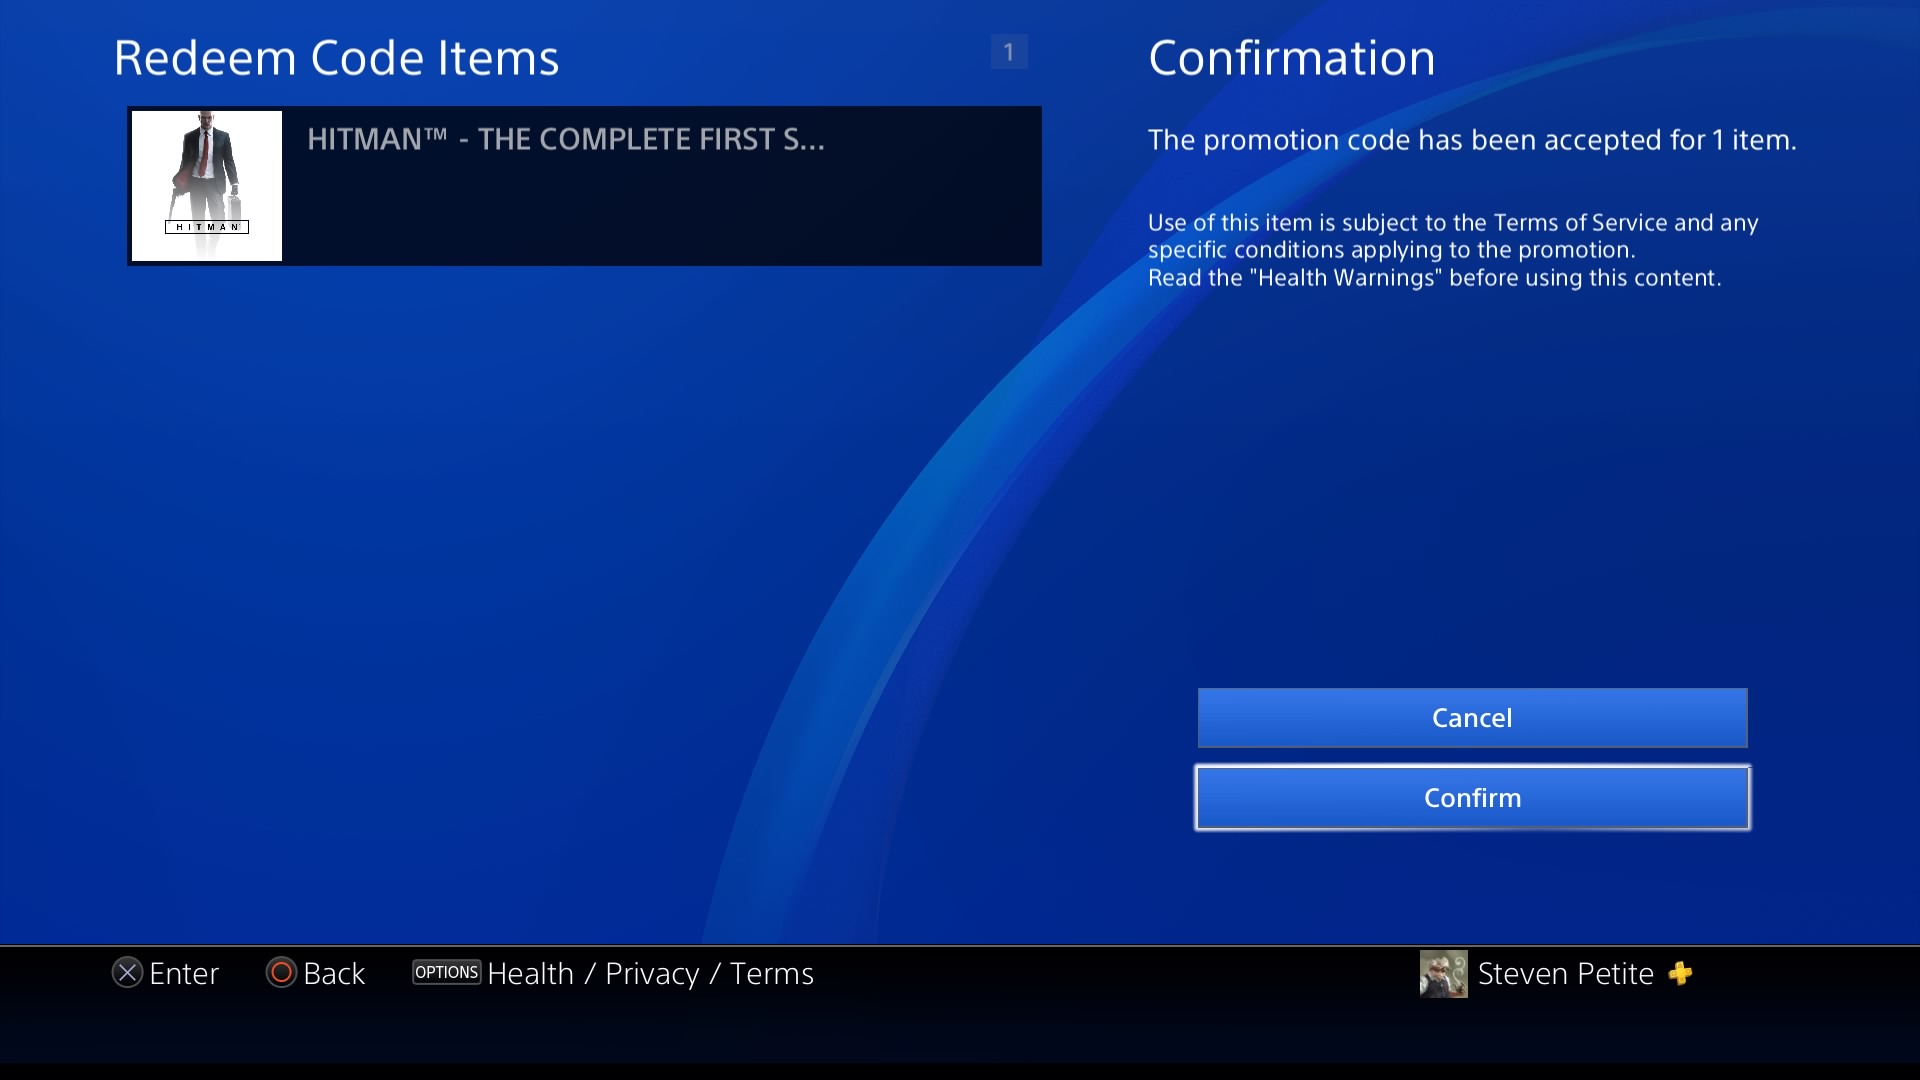 hoppe Arrowhead Tilbageholdelse How to Redeem a Code on Your PS4 | Digital Trends